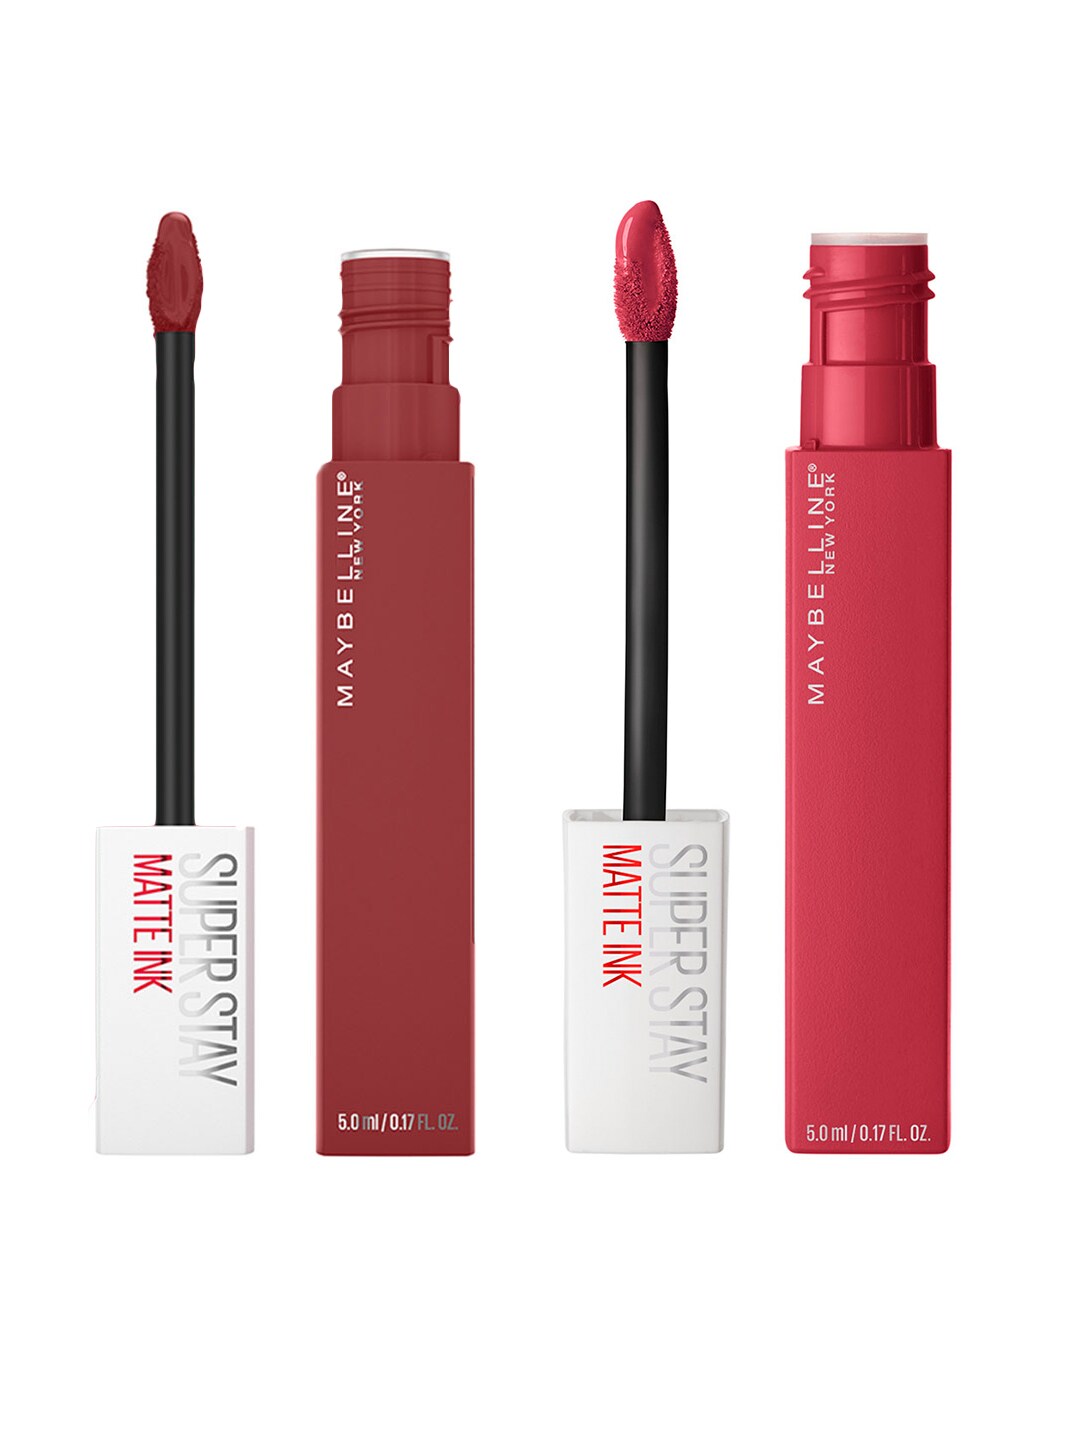 Maybelline New York Set of 2 Super Stay Matte Ink Lipsticks- Ruler 80 & Initiator 170 Price in India